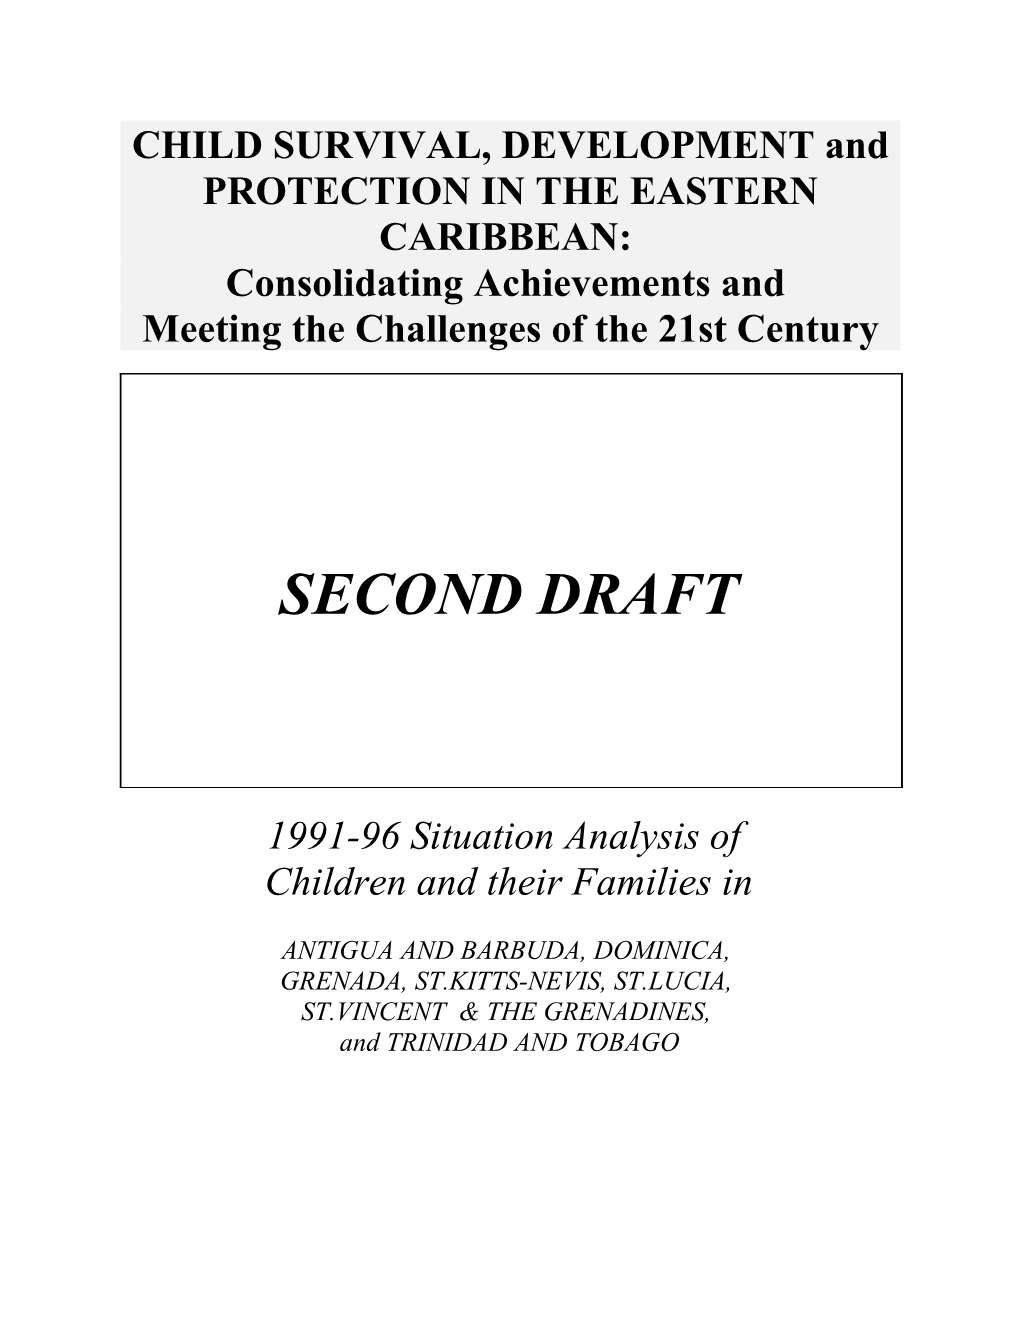 CHILD SURVIVAL, DEVELOPMENT and PROTECTION in the EASTERN CARIBBEAN